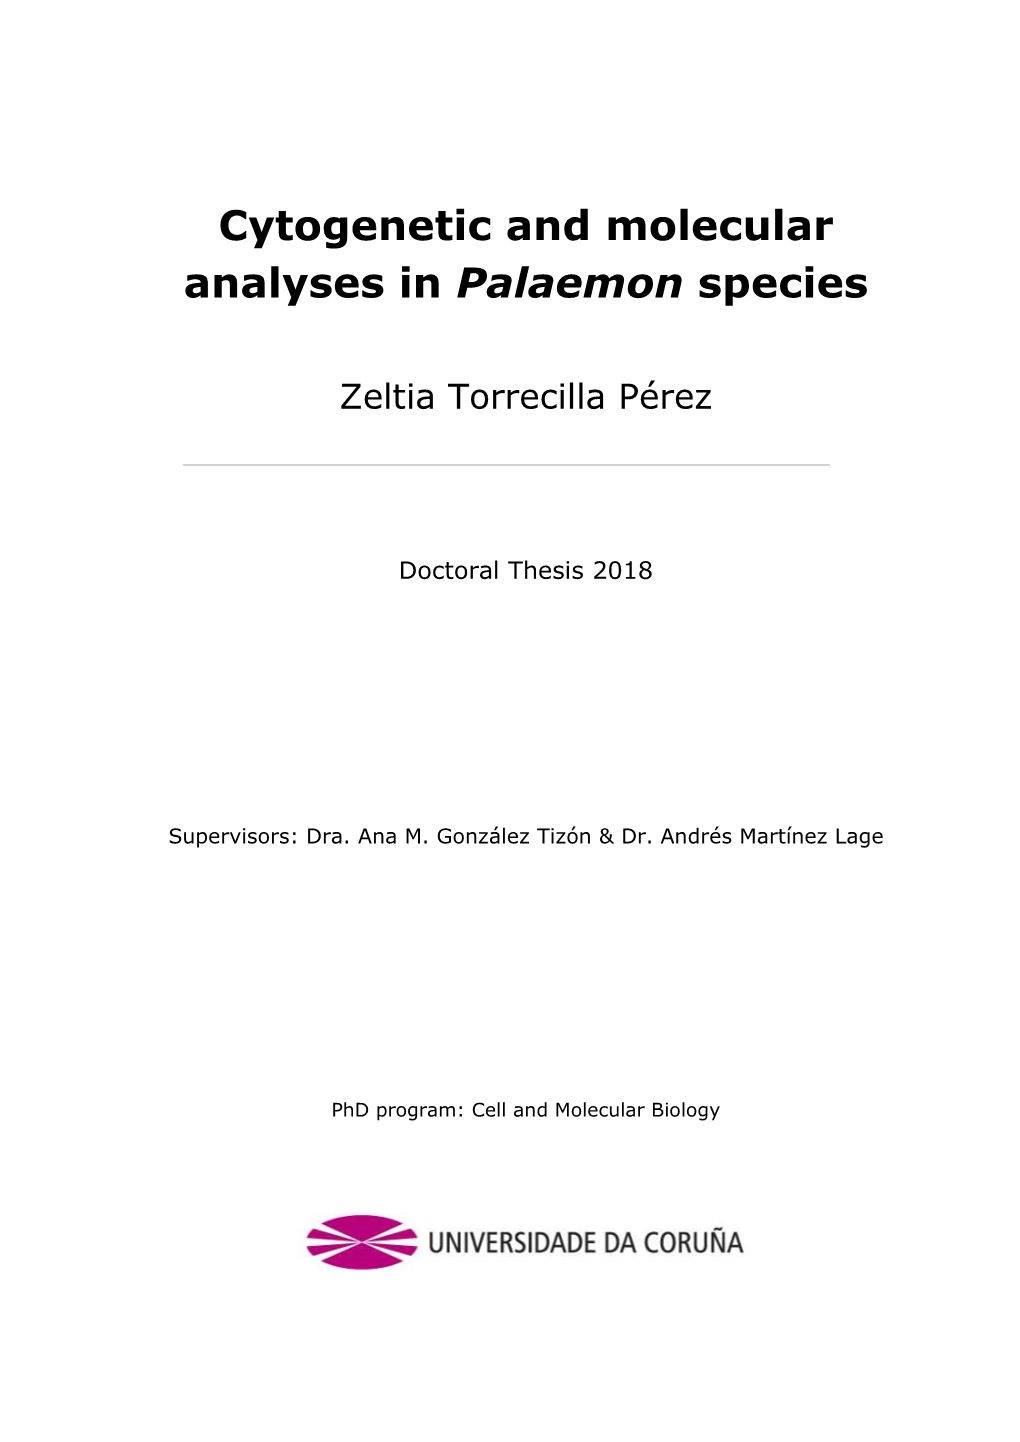 Cytogenetic and Molecular Analyses in "Palaemon" Species